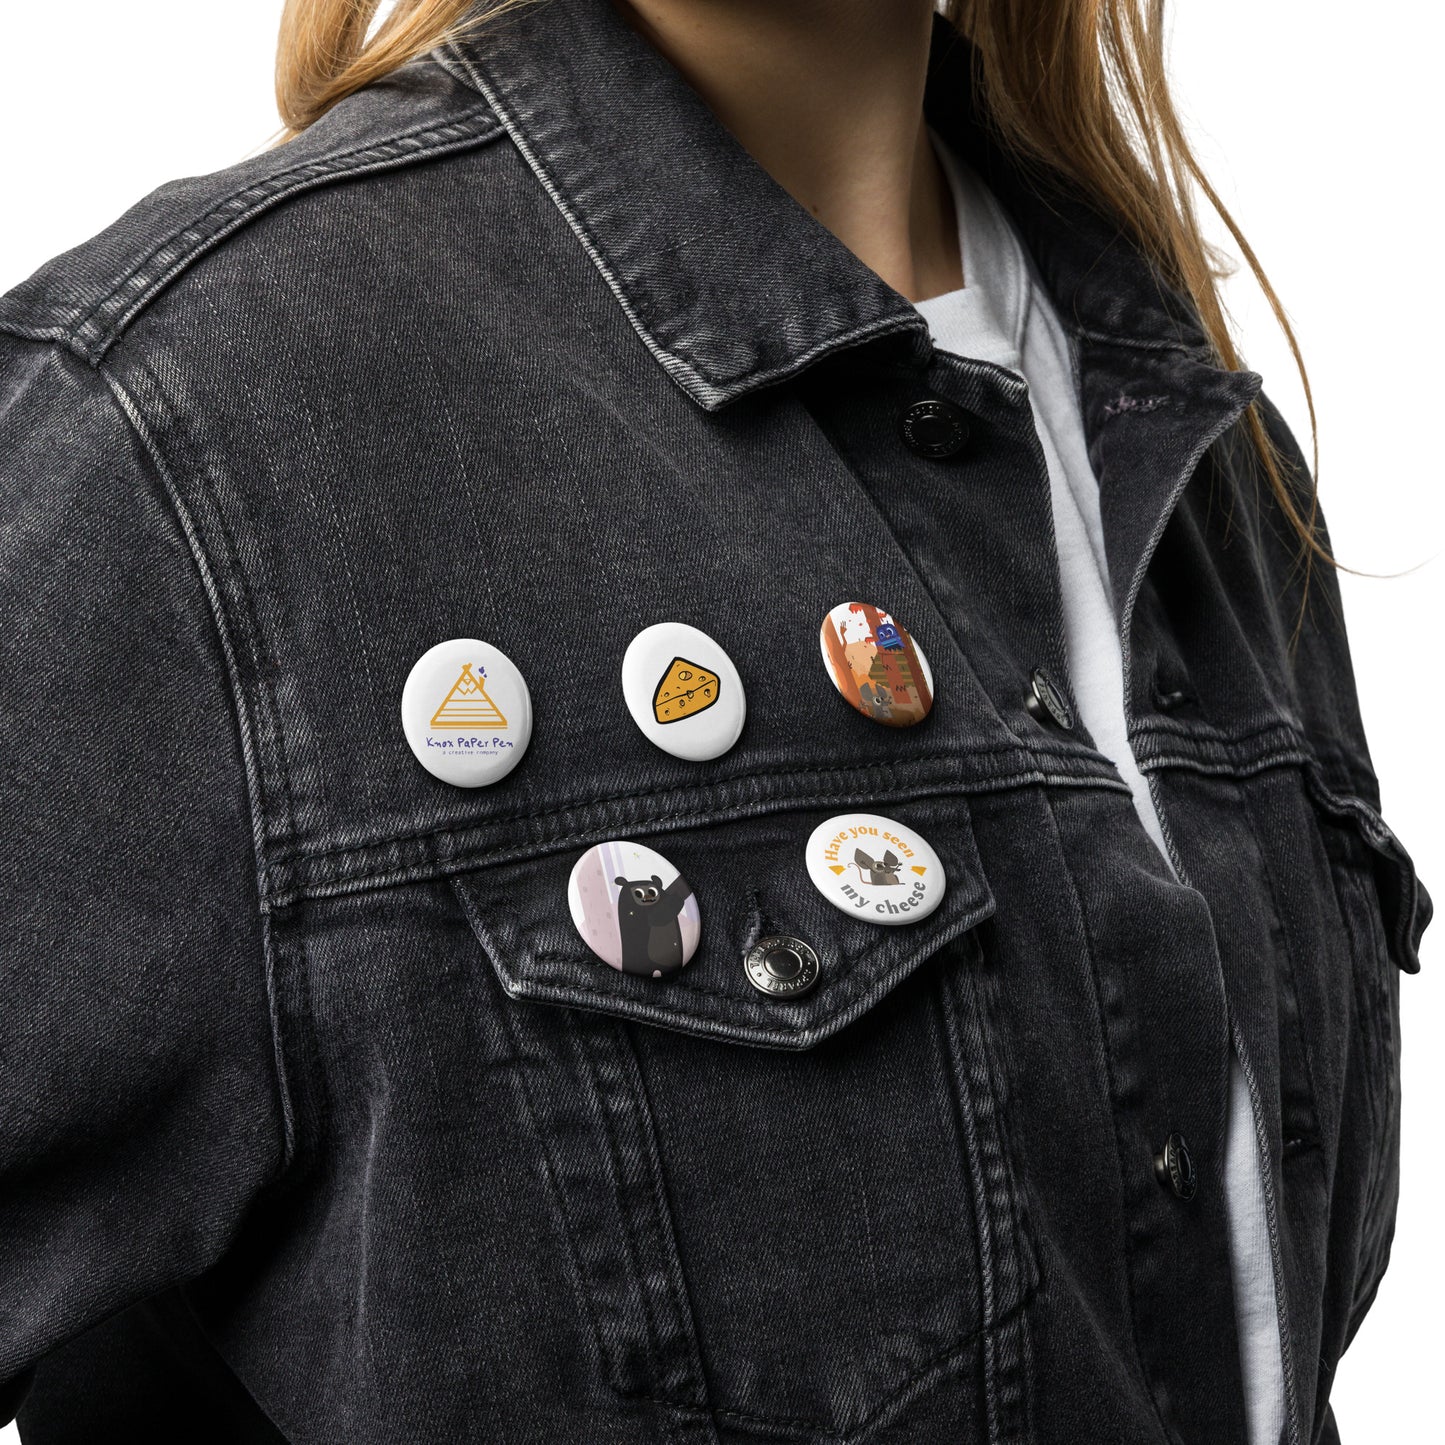 Have you seen my cheese pin buttons pack